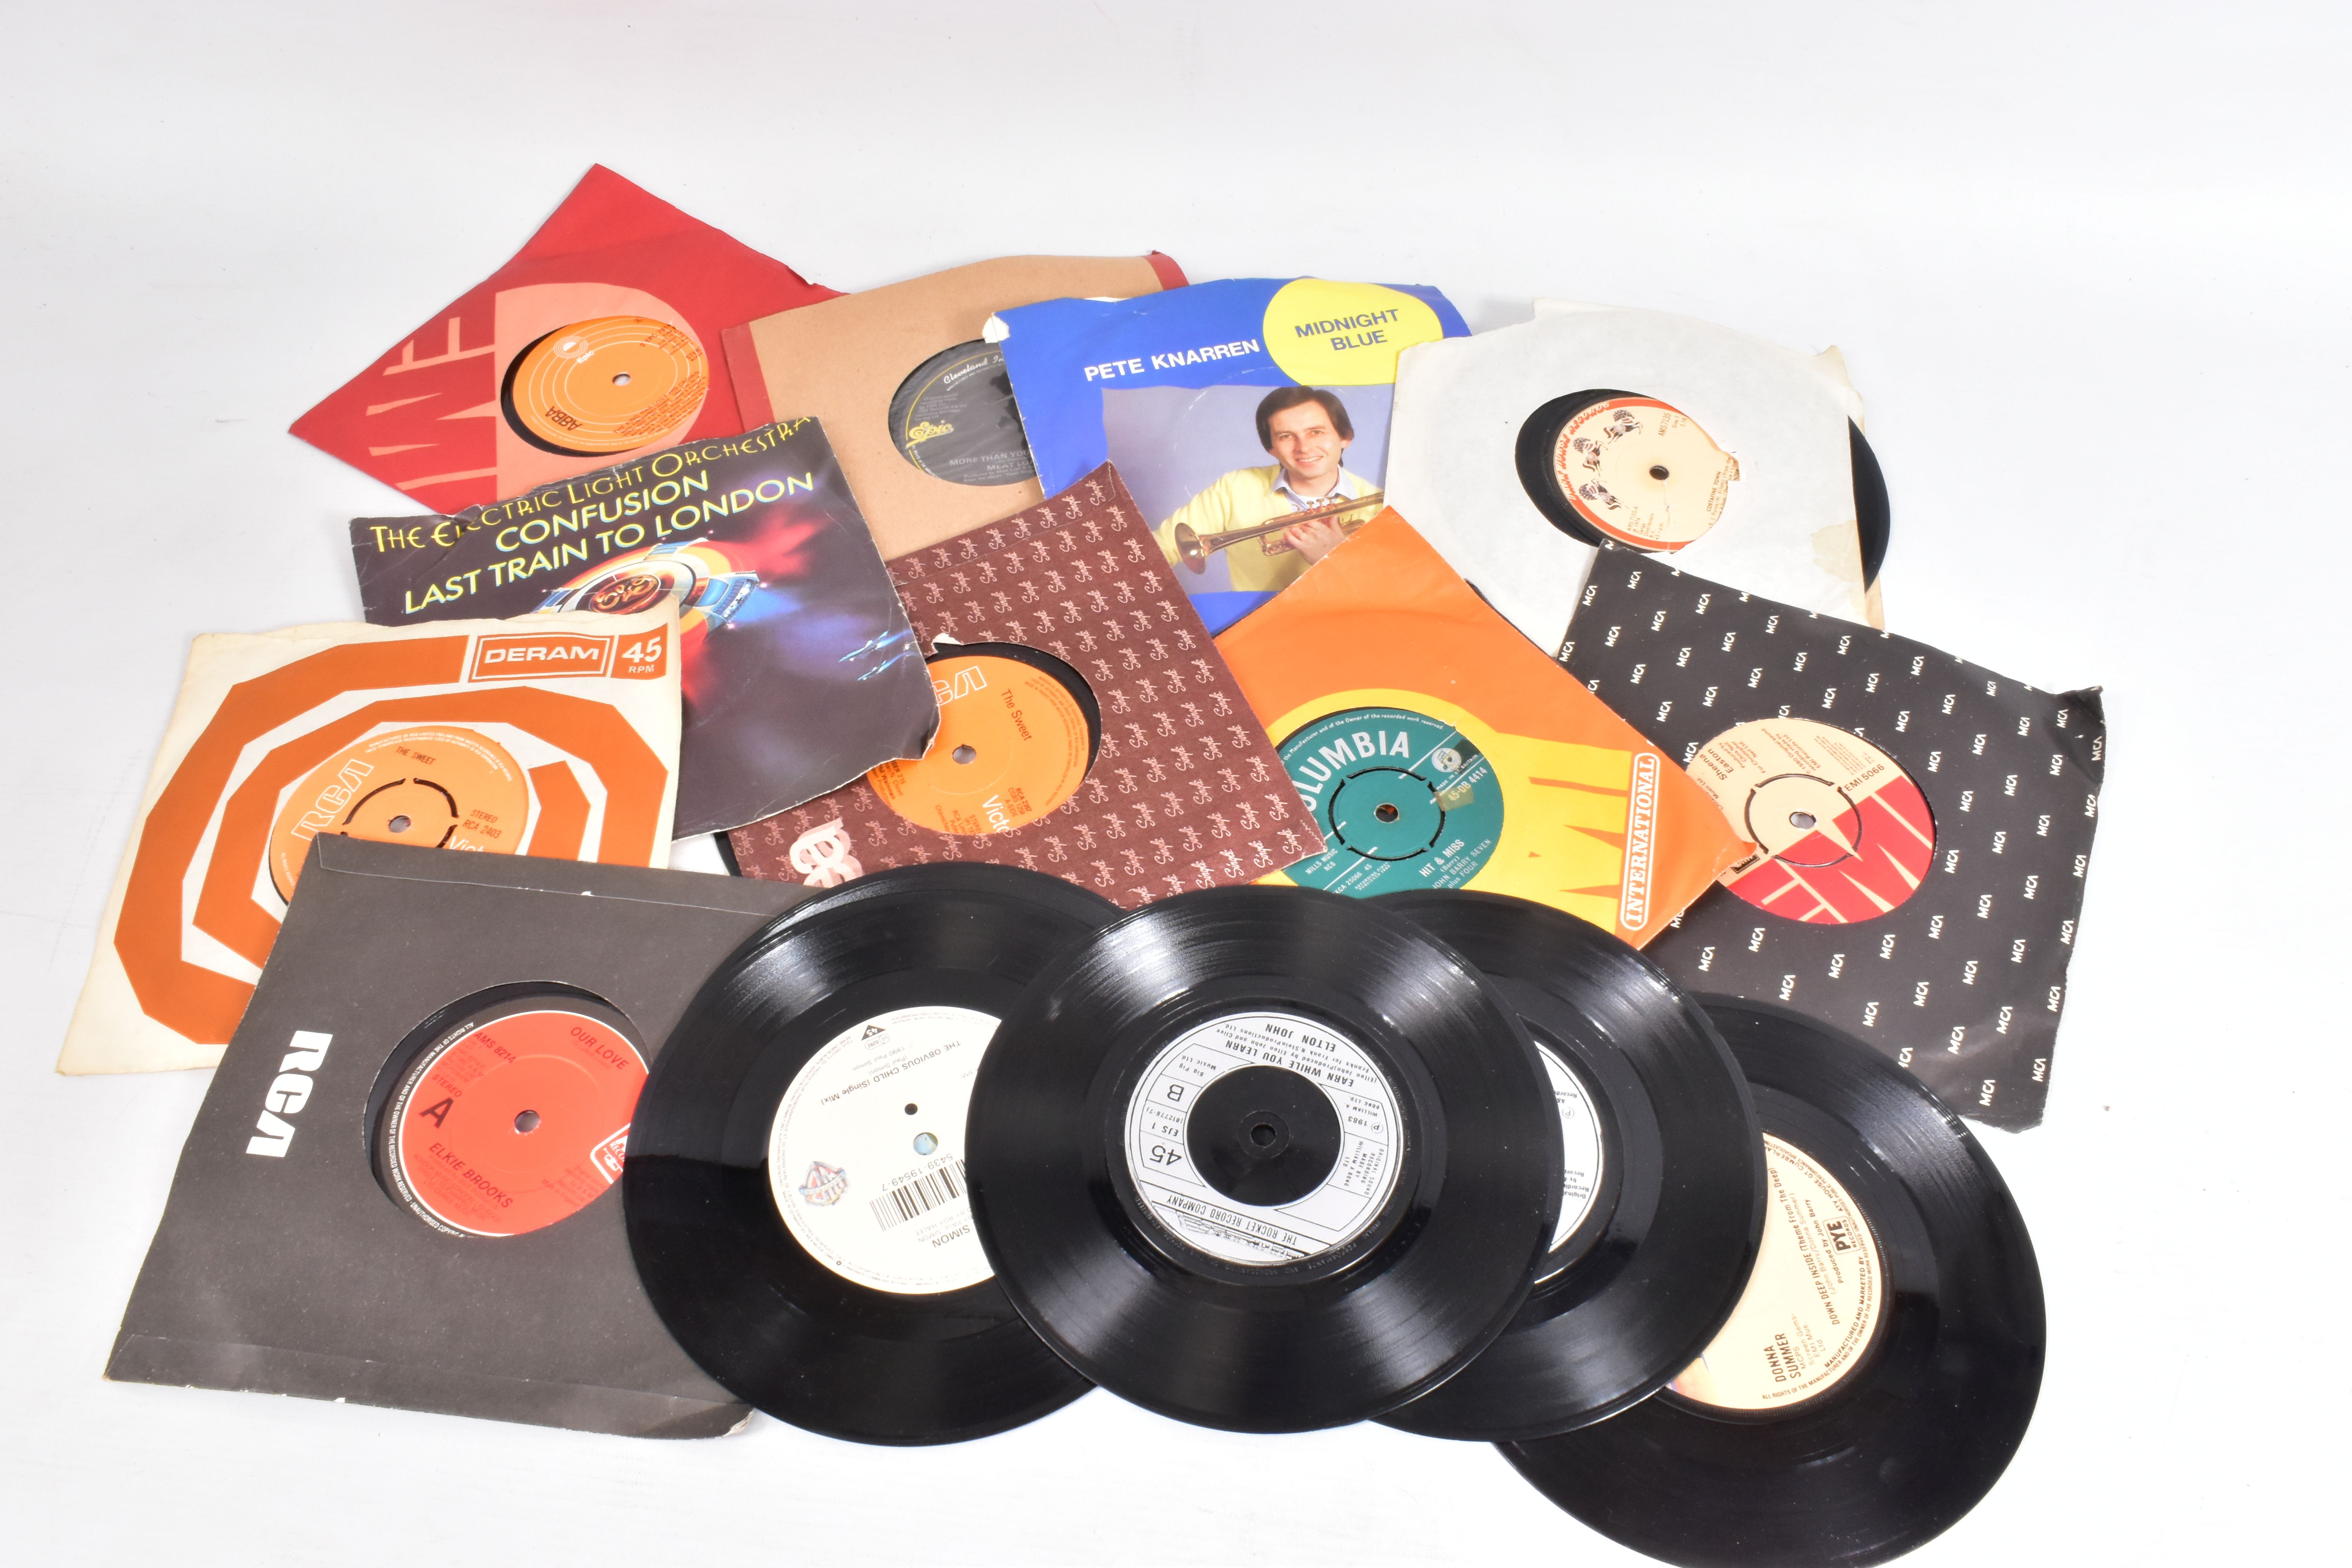 TWO TRAYS CONTAINING OVER ONE HUNDRED AND FIFTY SINGLES mostly from the 1970s and 1980s artista - Image 5 of 6